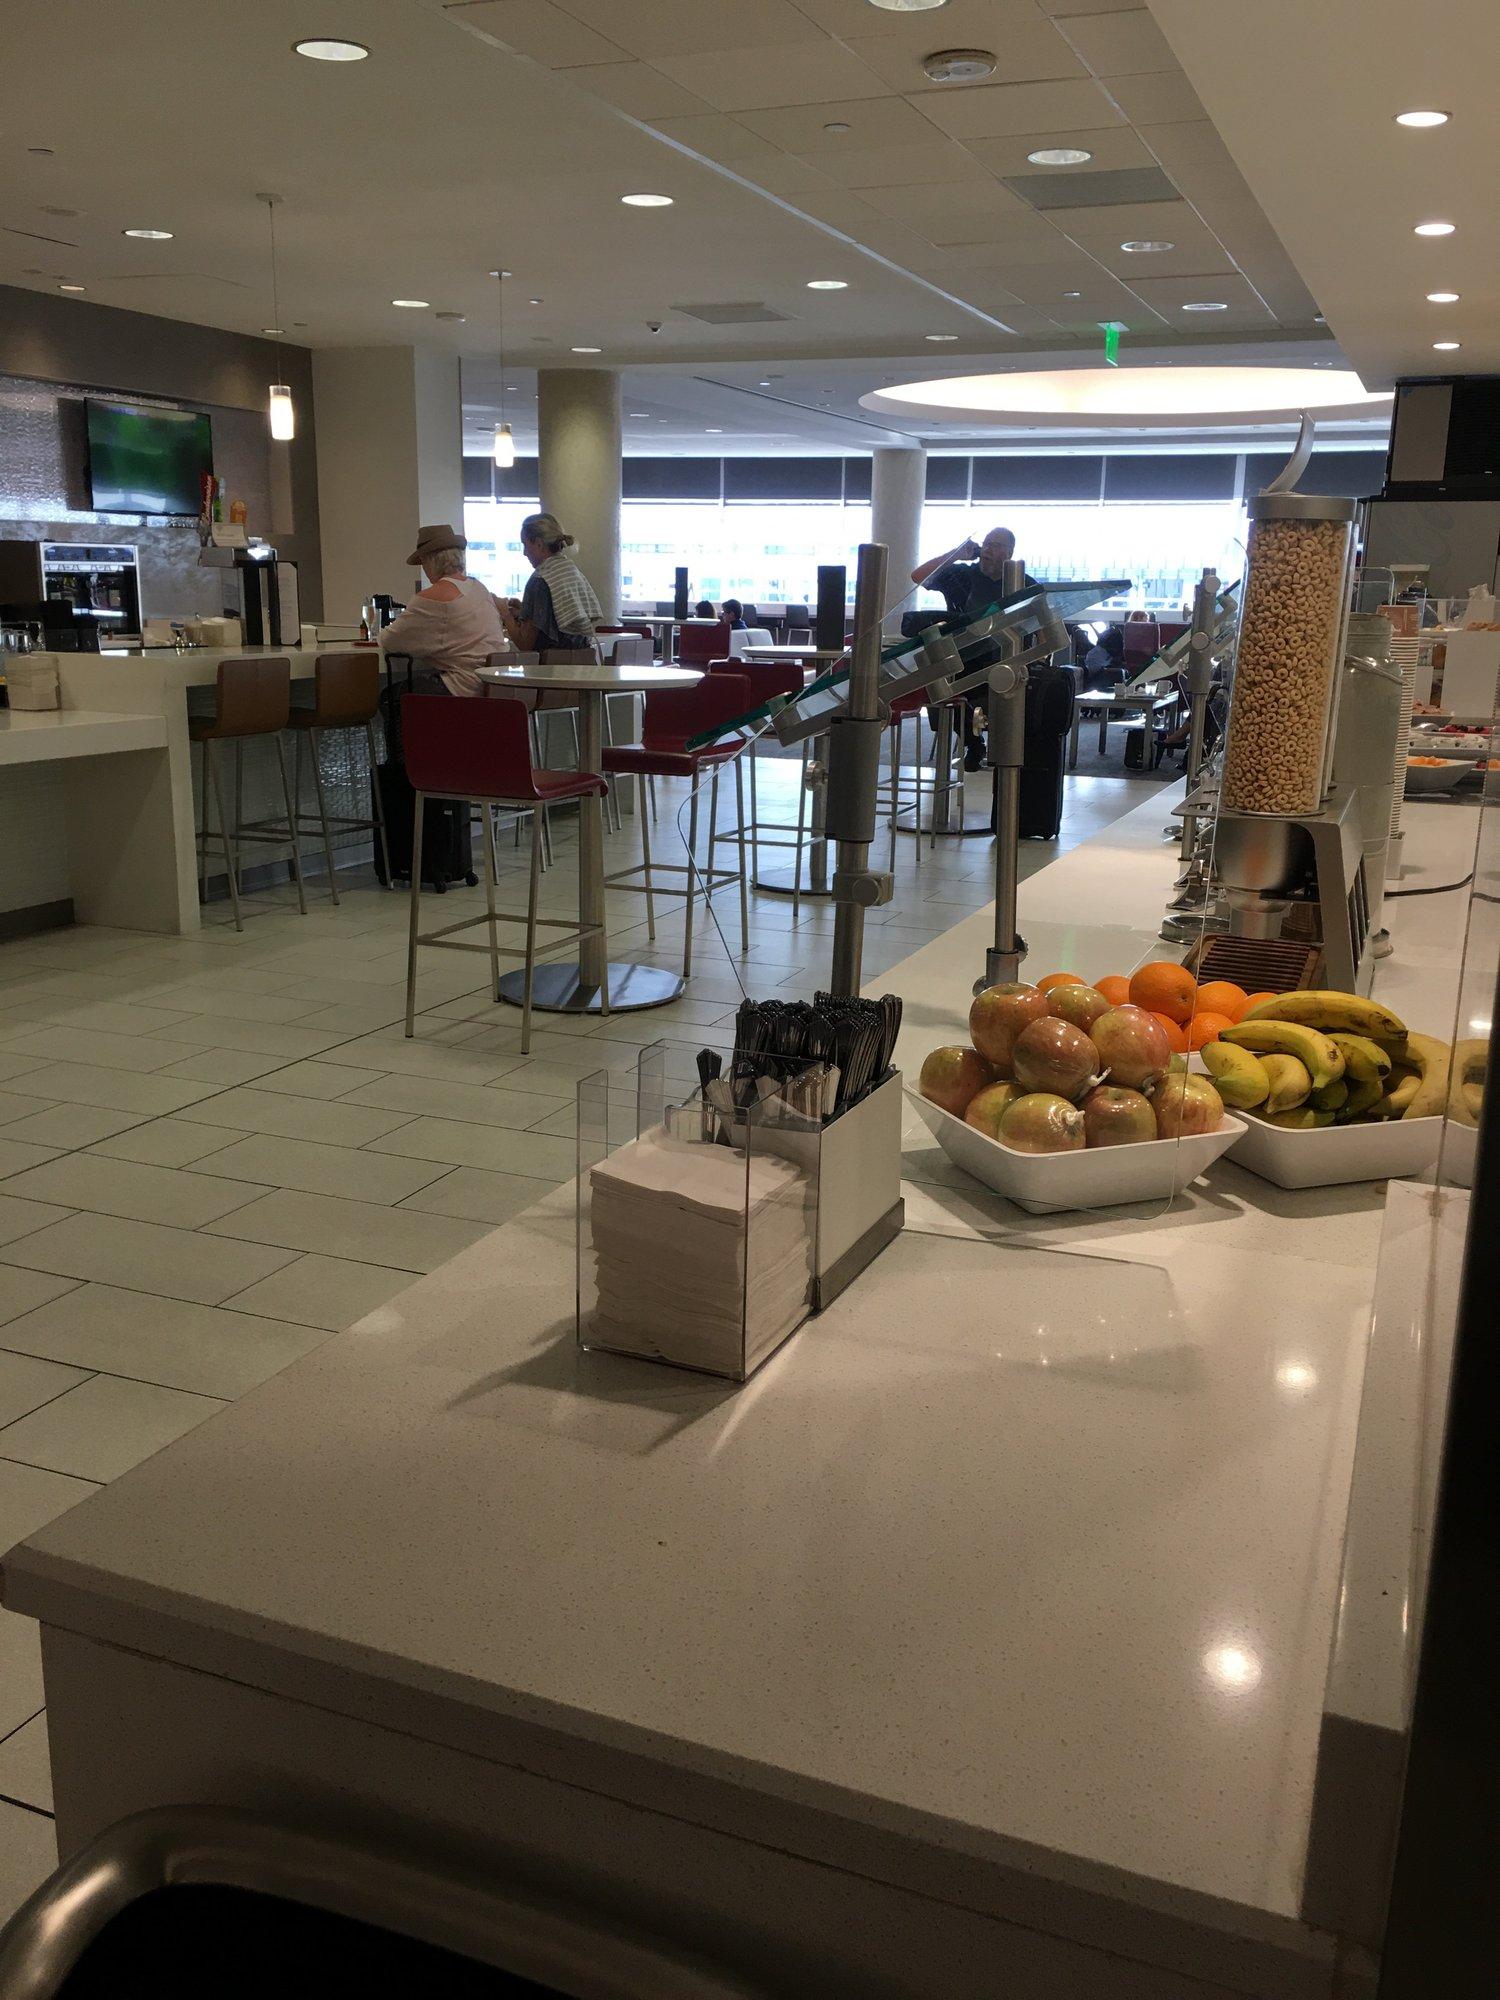 American Airlines Admirals Club image 4 of 38